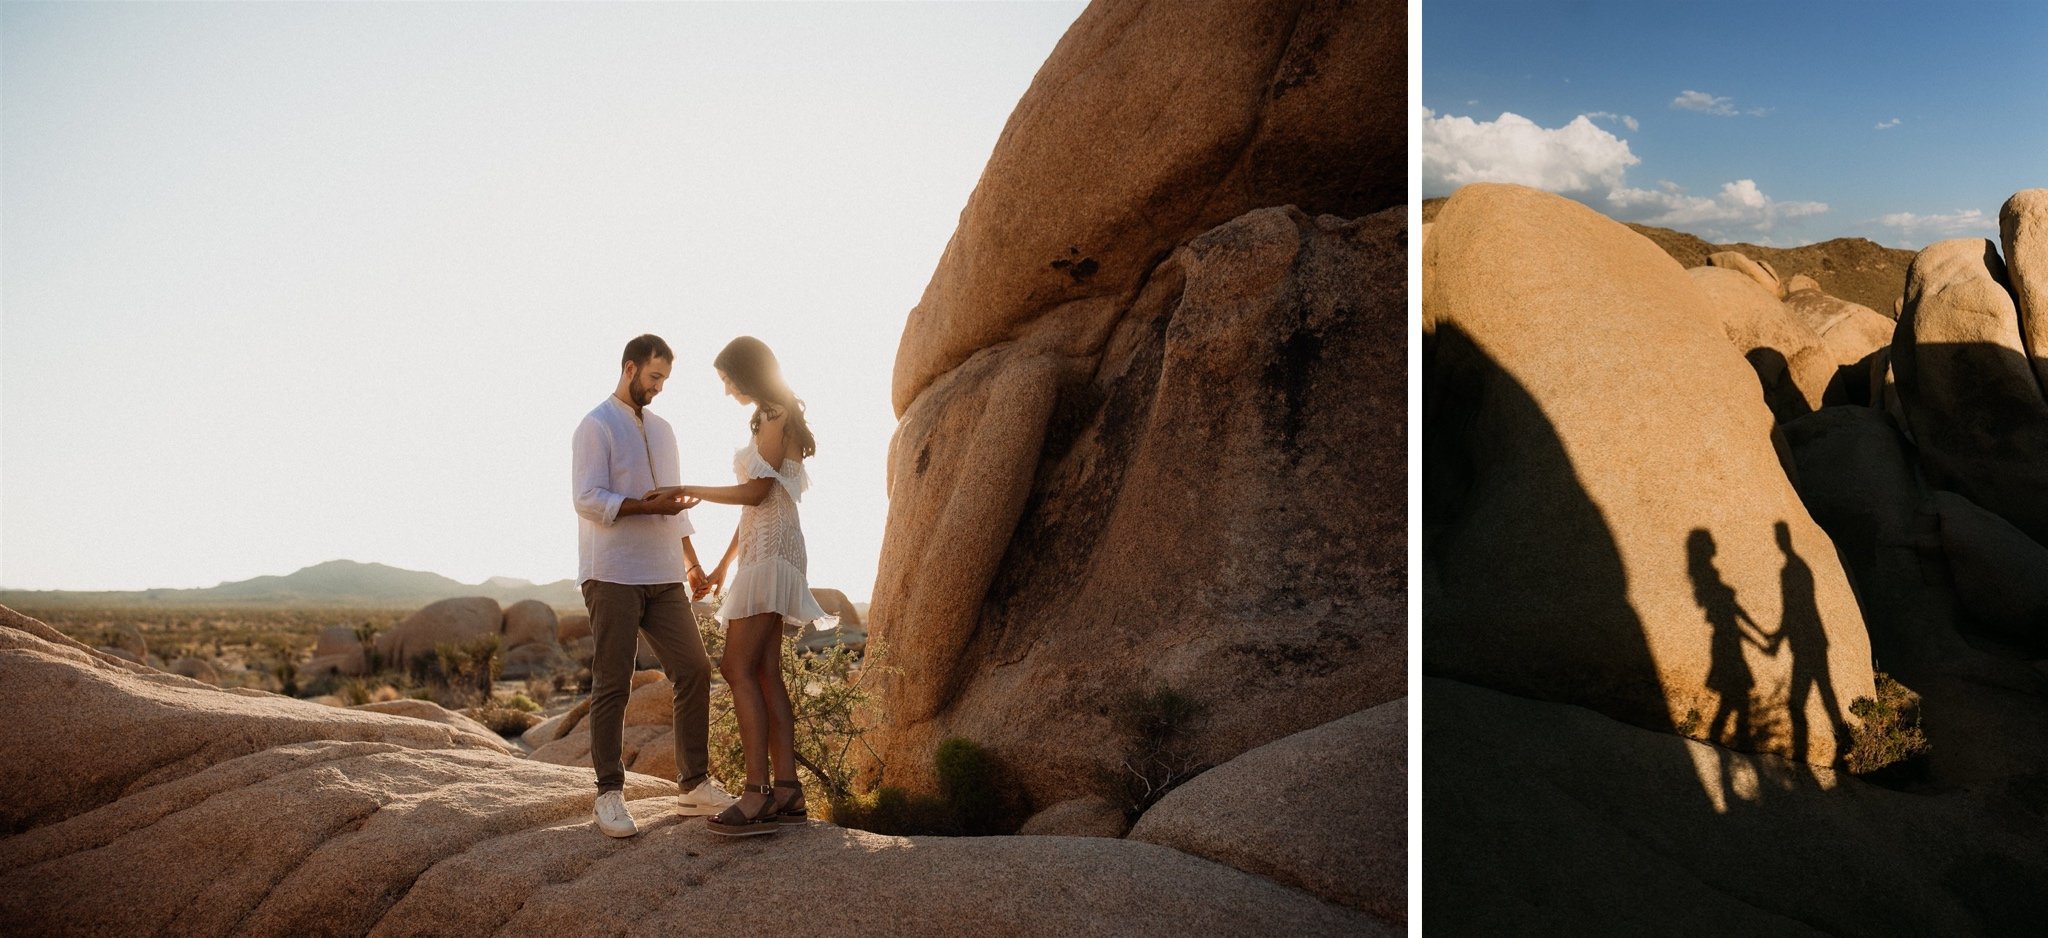 Joshua Tree Couples Session Surprise Proposal - Will Khoury Photography_31.jpg